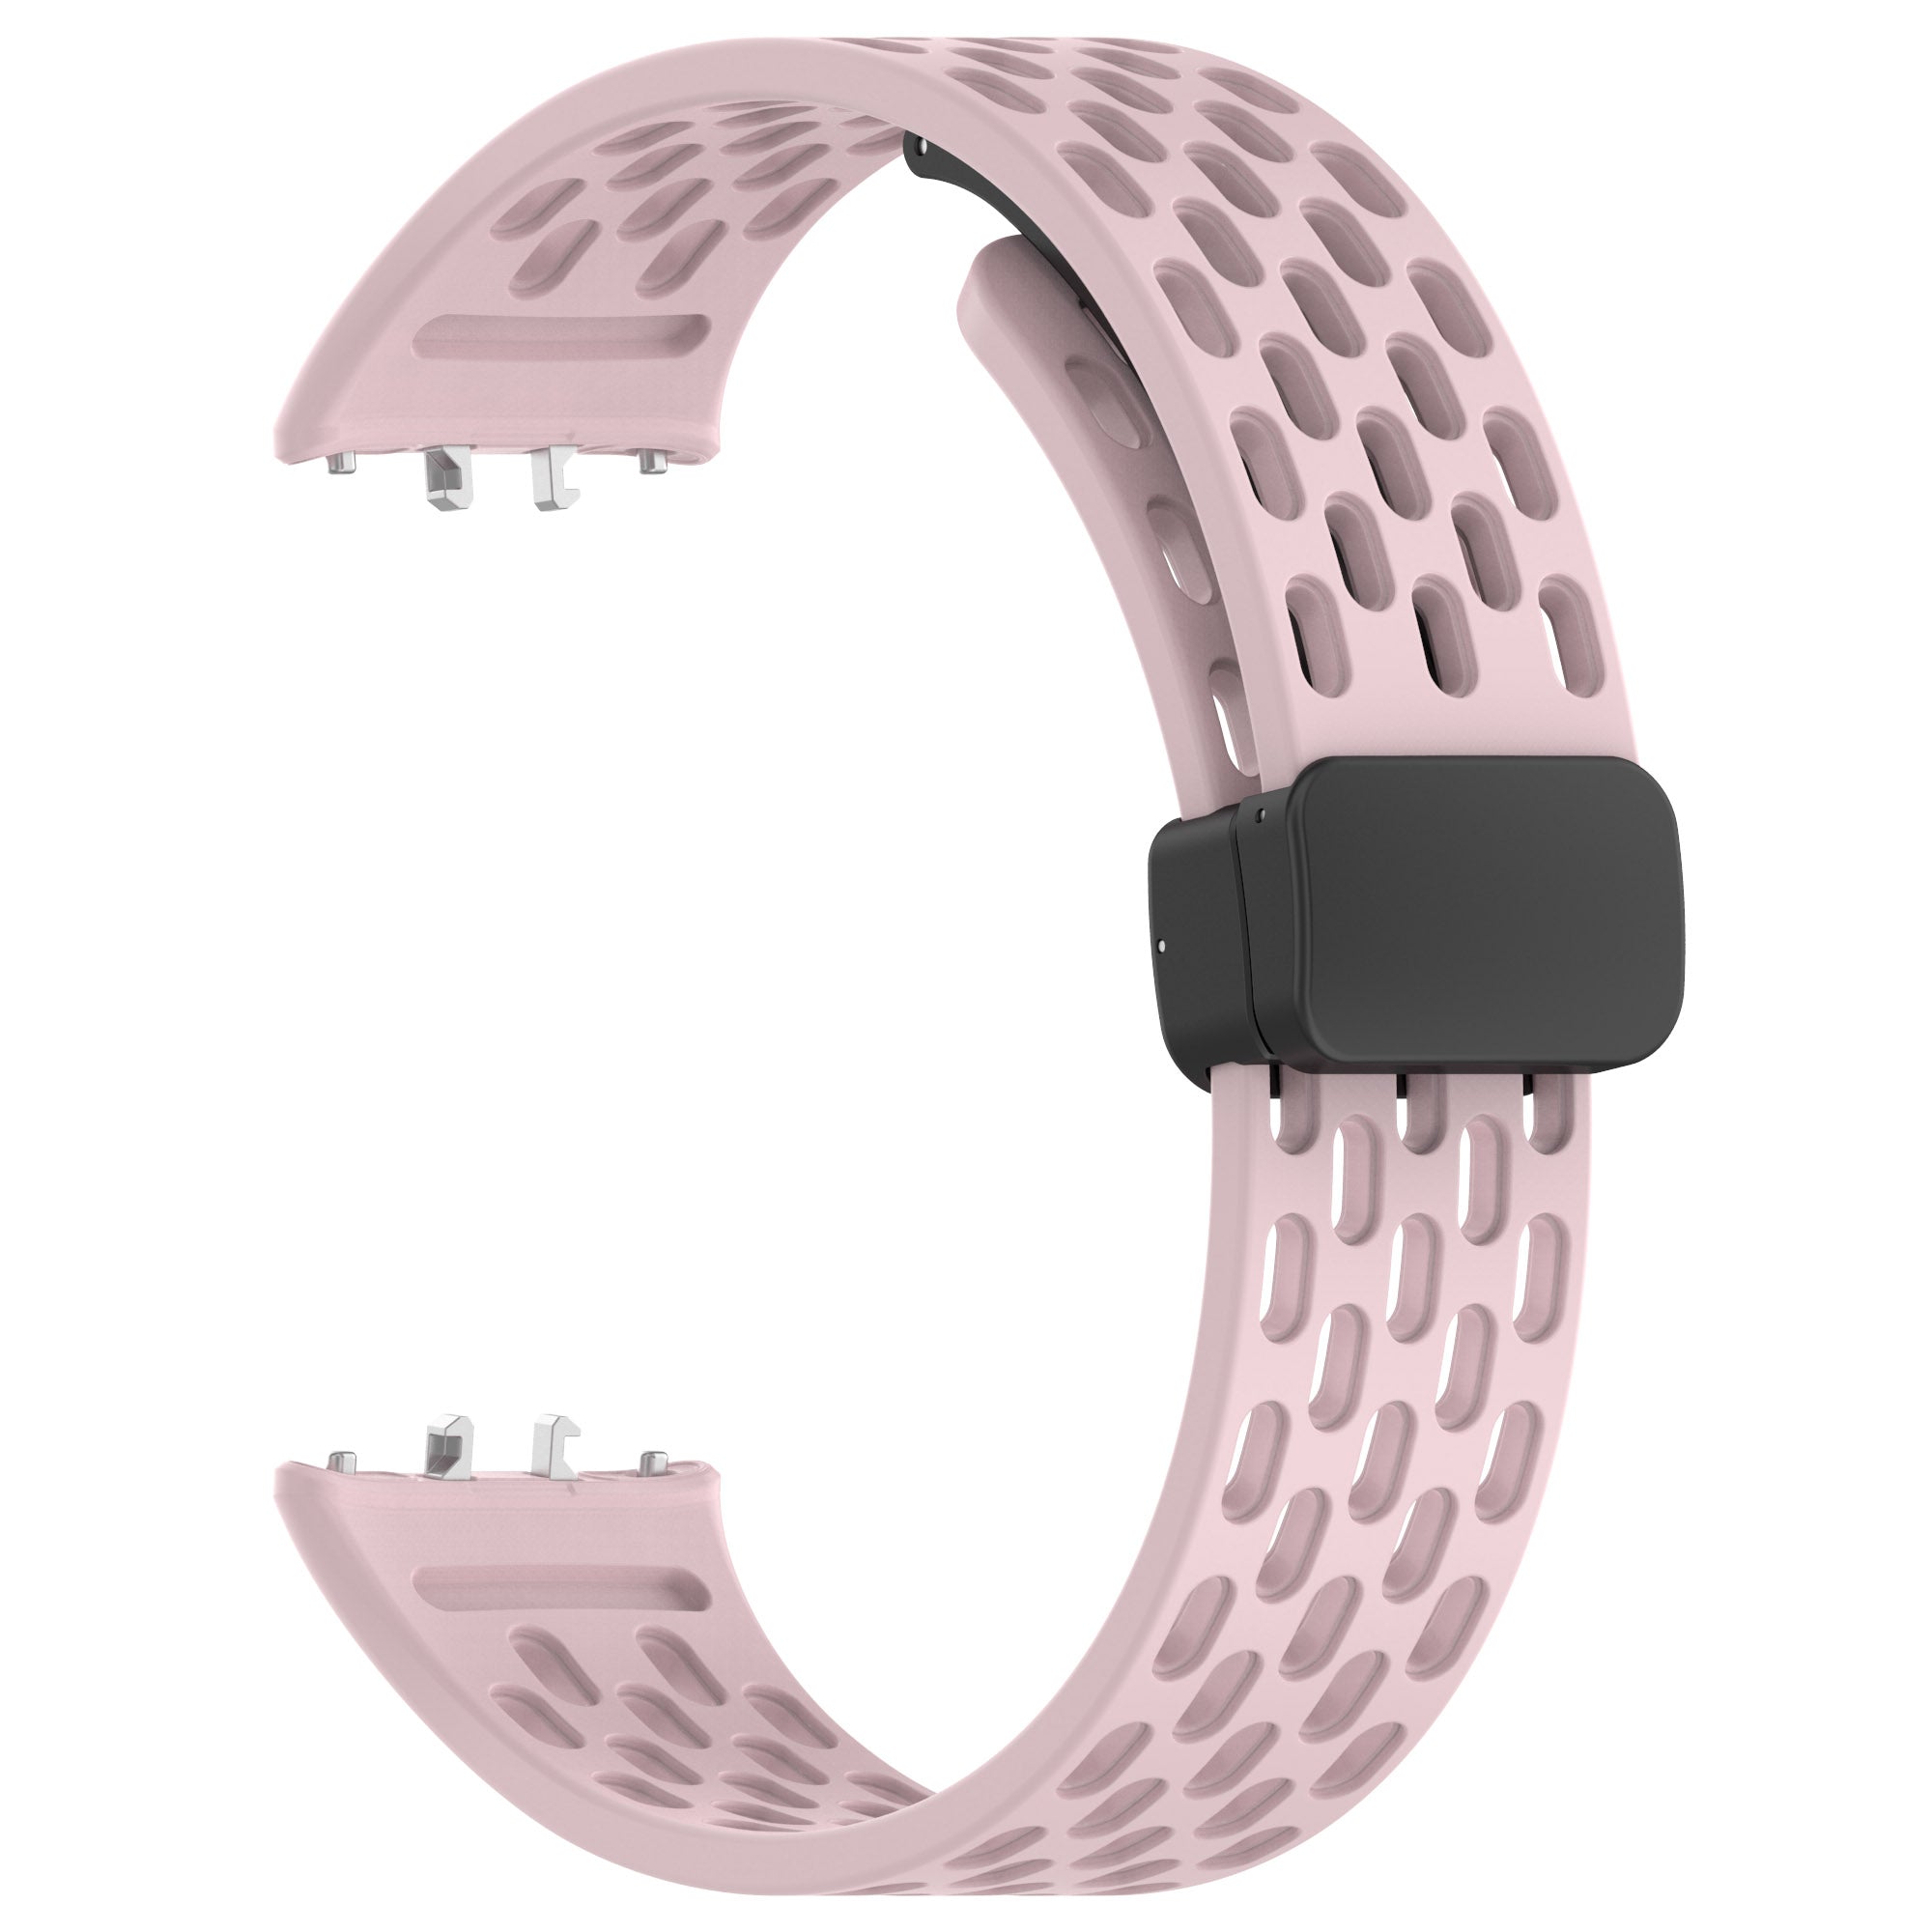 Wrist Band for Samsung Galaxy Fit3 R930 Magnetic Silicone Smartwatch Bracelet Strap - Pink